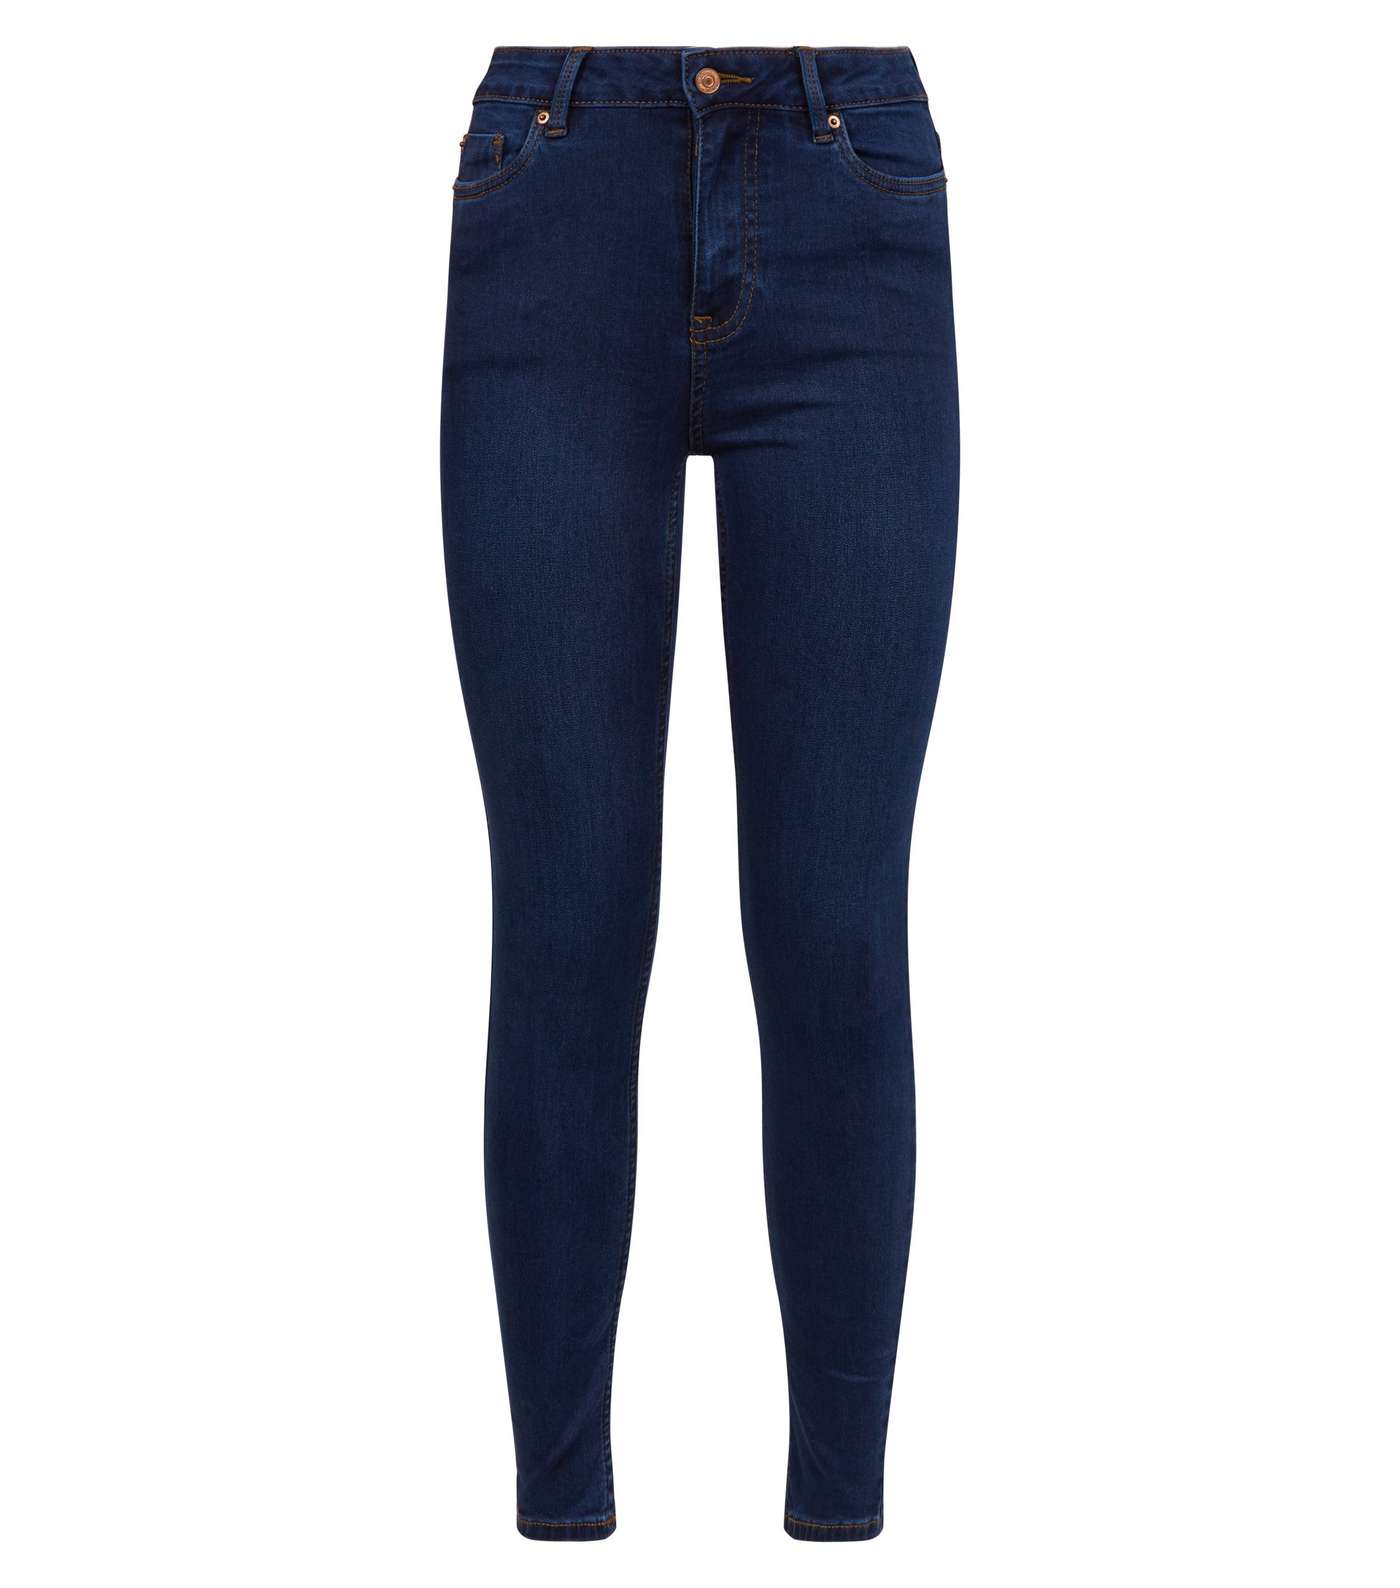 Blue Rinse Wash Mid Rise India Super Skinny Jeans Image 4